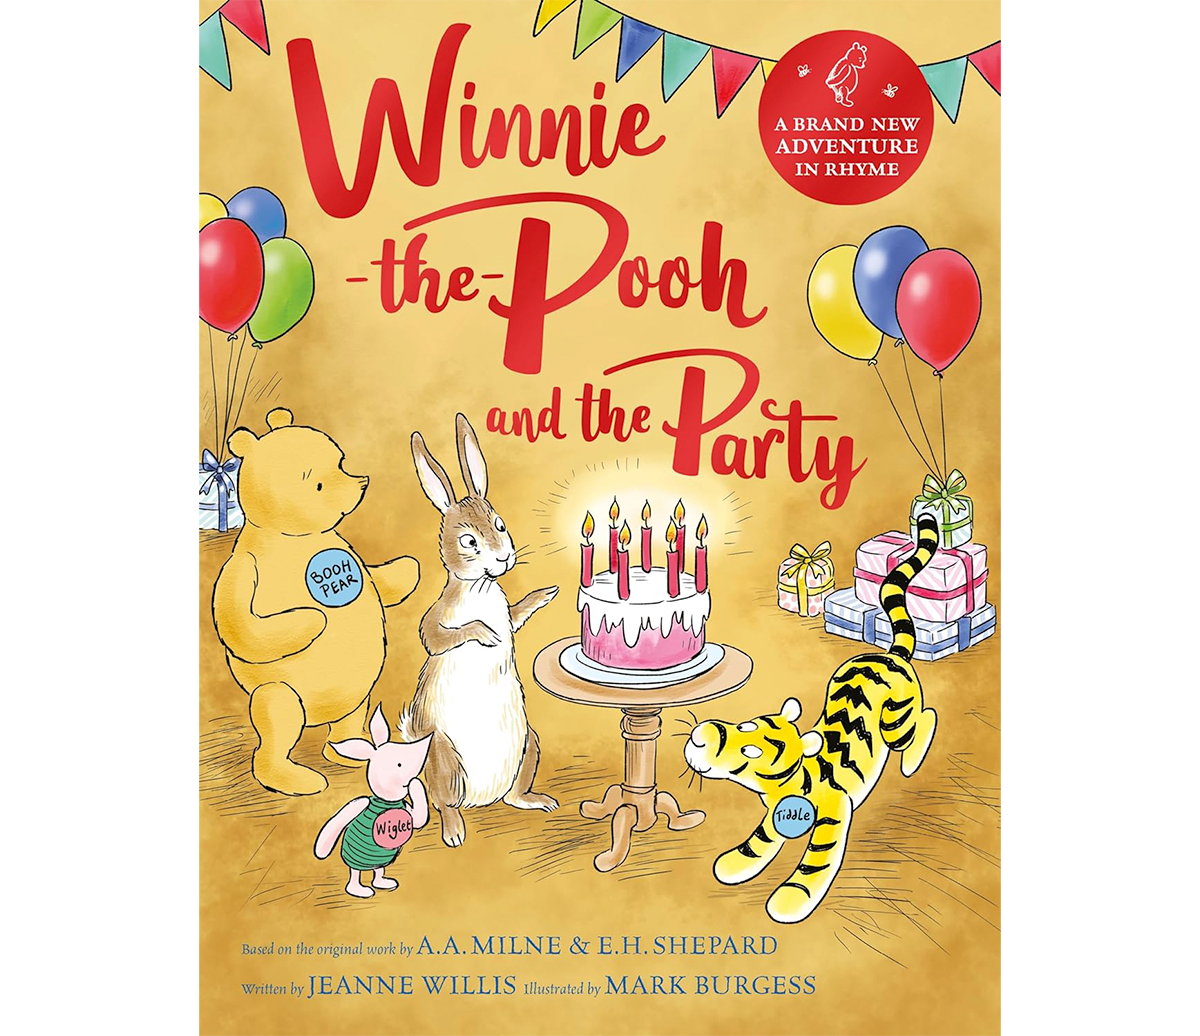 jeanne-willis-winnie-the-pooh-and-the-party.png